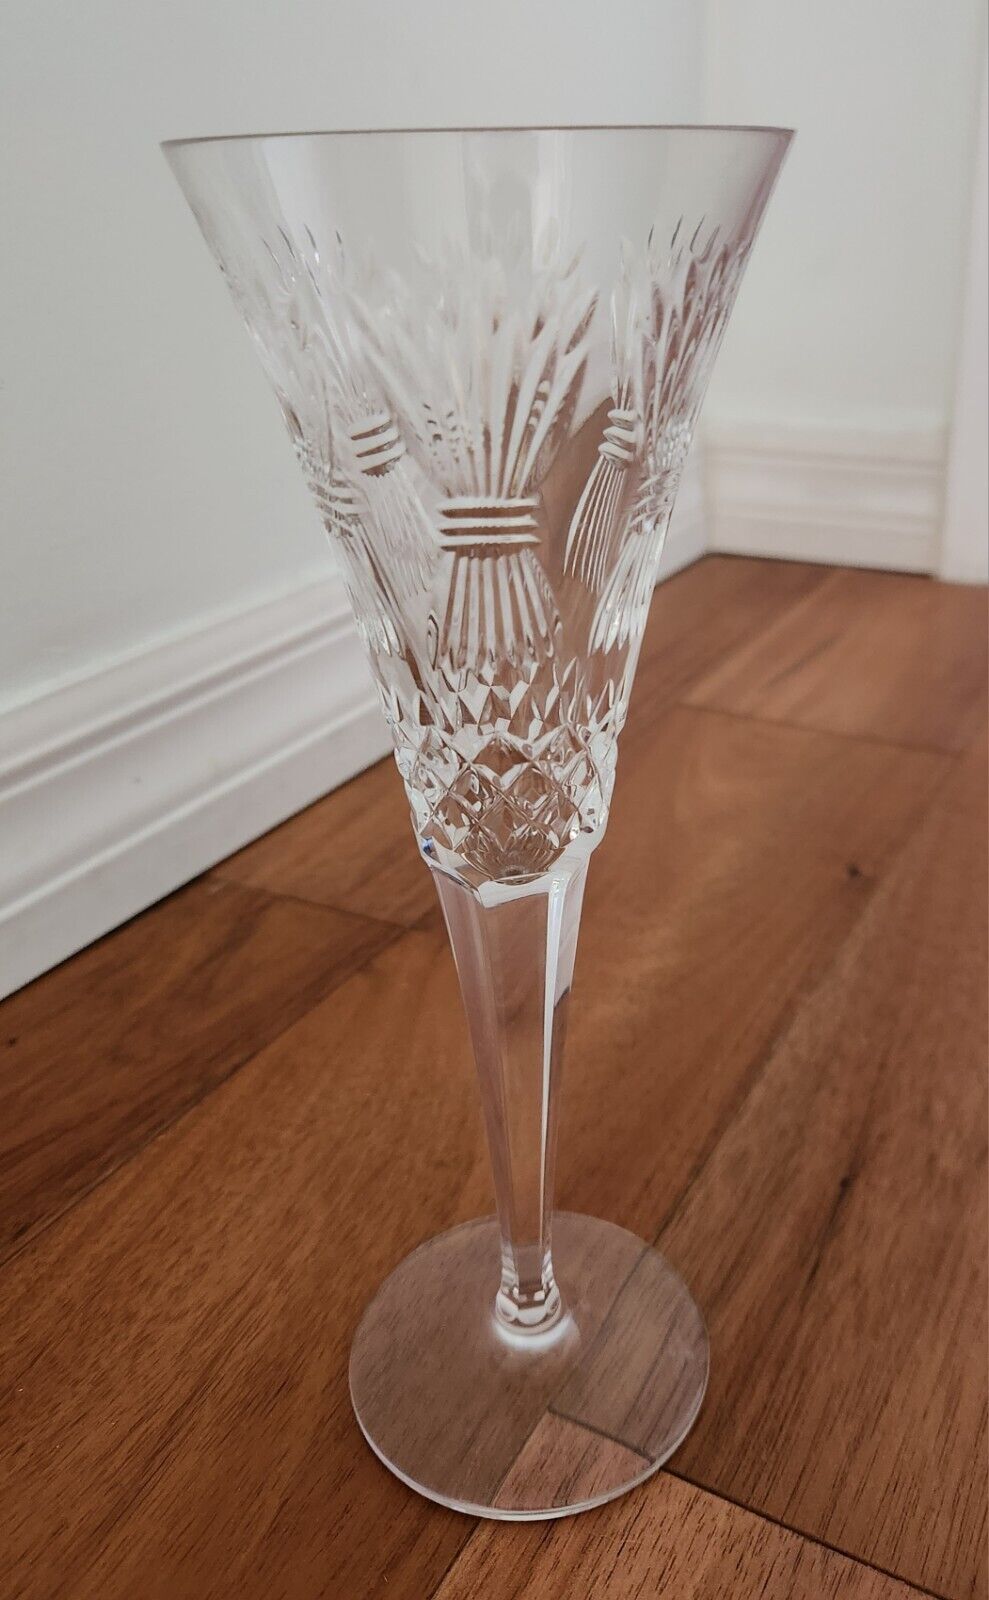 Waterford Crystal Glass Millenium Wheat Prosperity Toasting Champagne Flute MINT